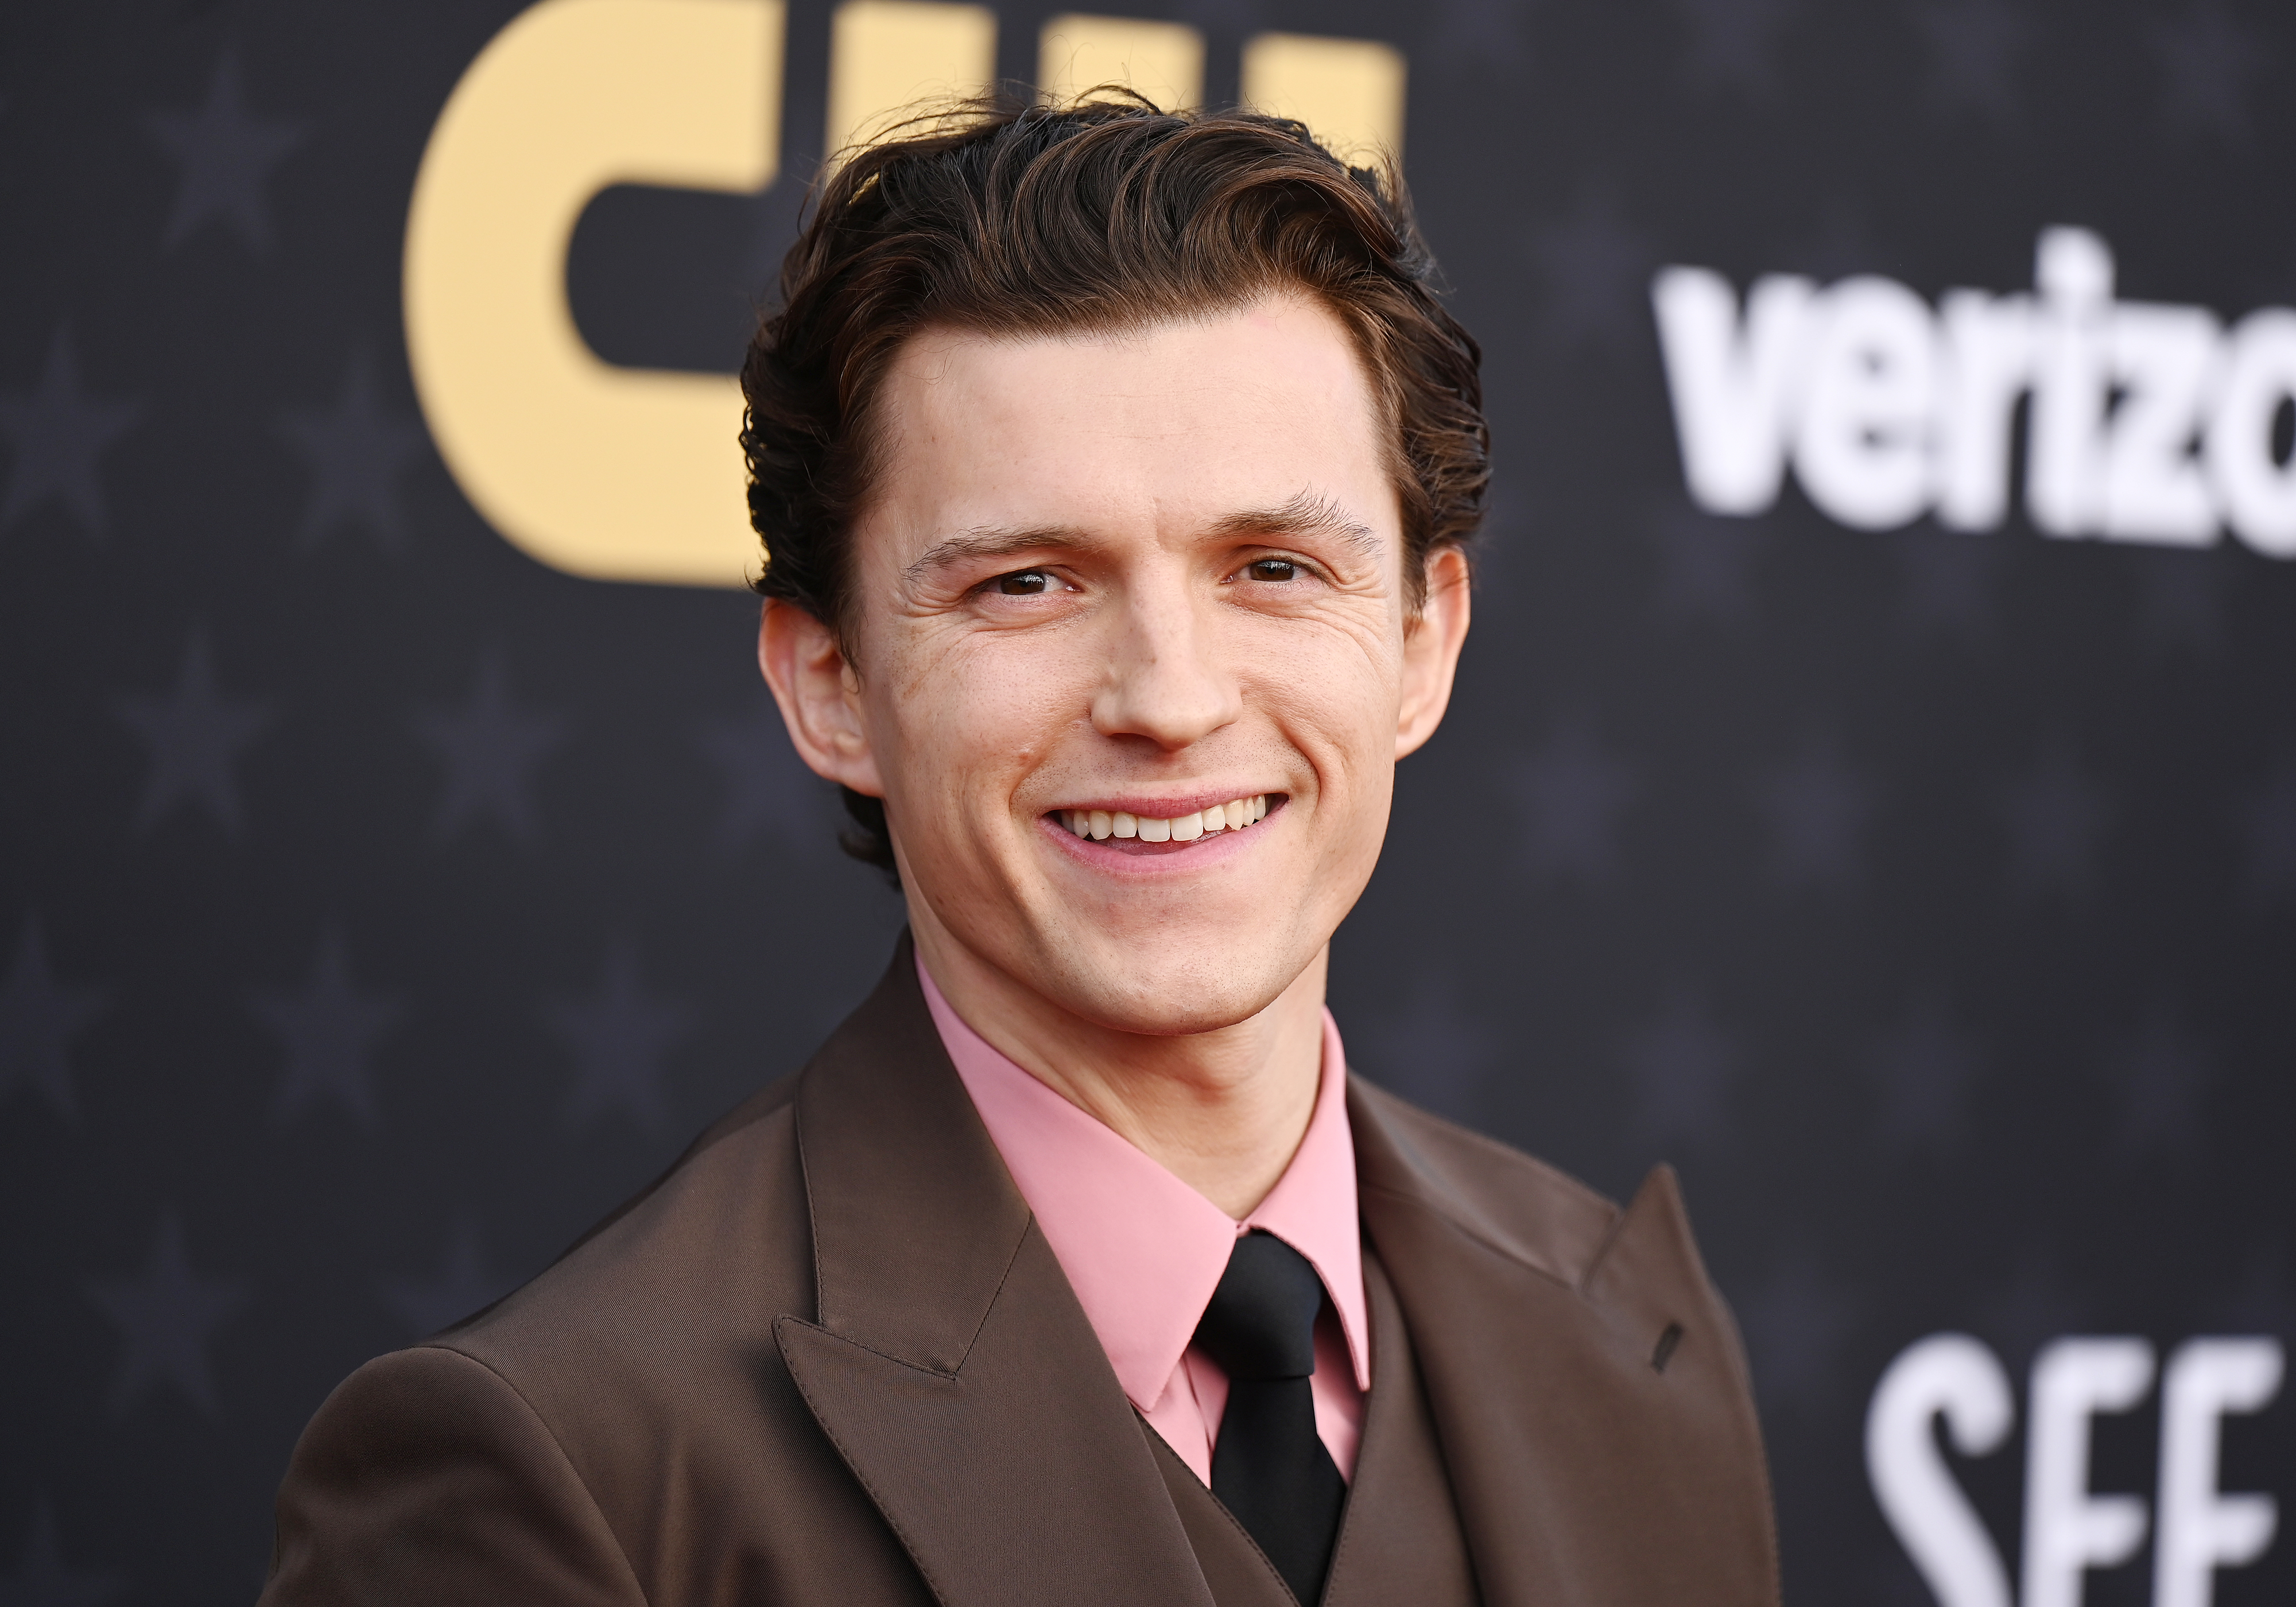 Close-up of Tom Holland smiling in a suit and tie at a media event